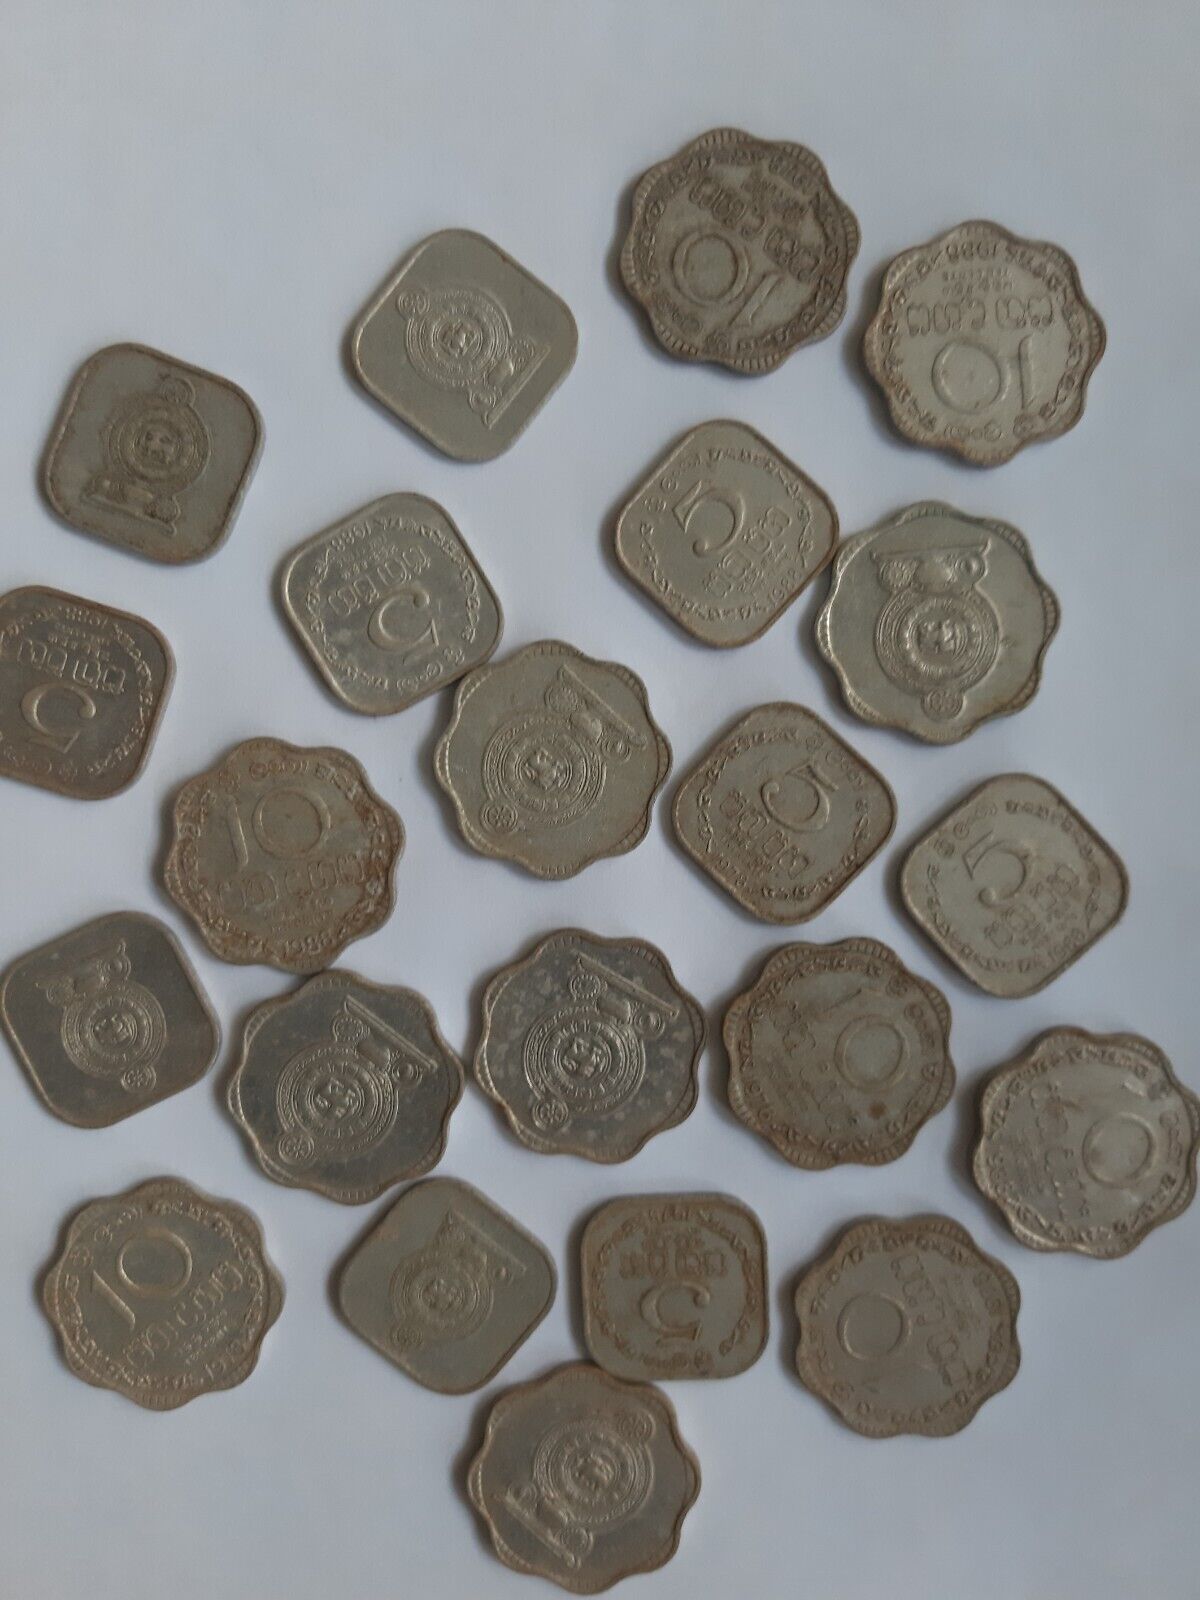 SRI LANKAN COINS. SOUTH ASIA ISLAND. OLD COLLECTIBLE MONEY RUPEES 10 CENTS Без бренда - фотография #2